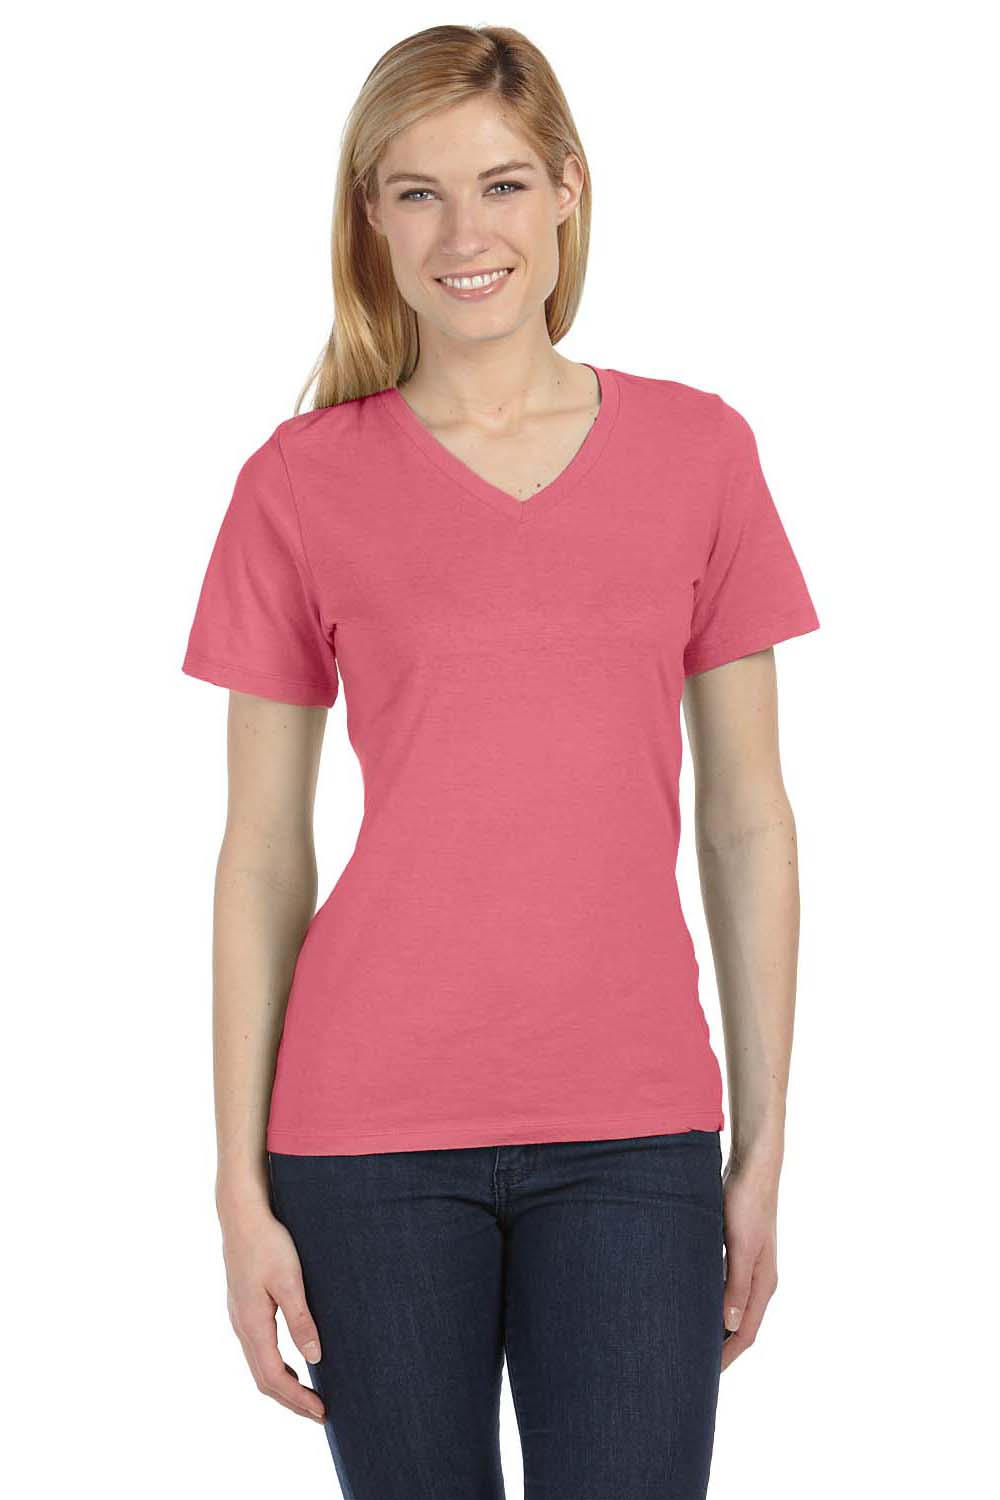 Bella + Canvas BC6405/6405 Womens Relaxed Jersey Short Sleeve V-Neck T-Shirt Red Triblend Model Front